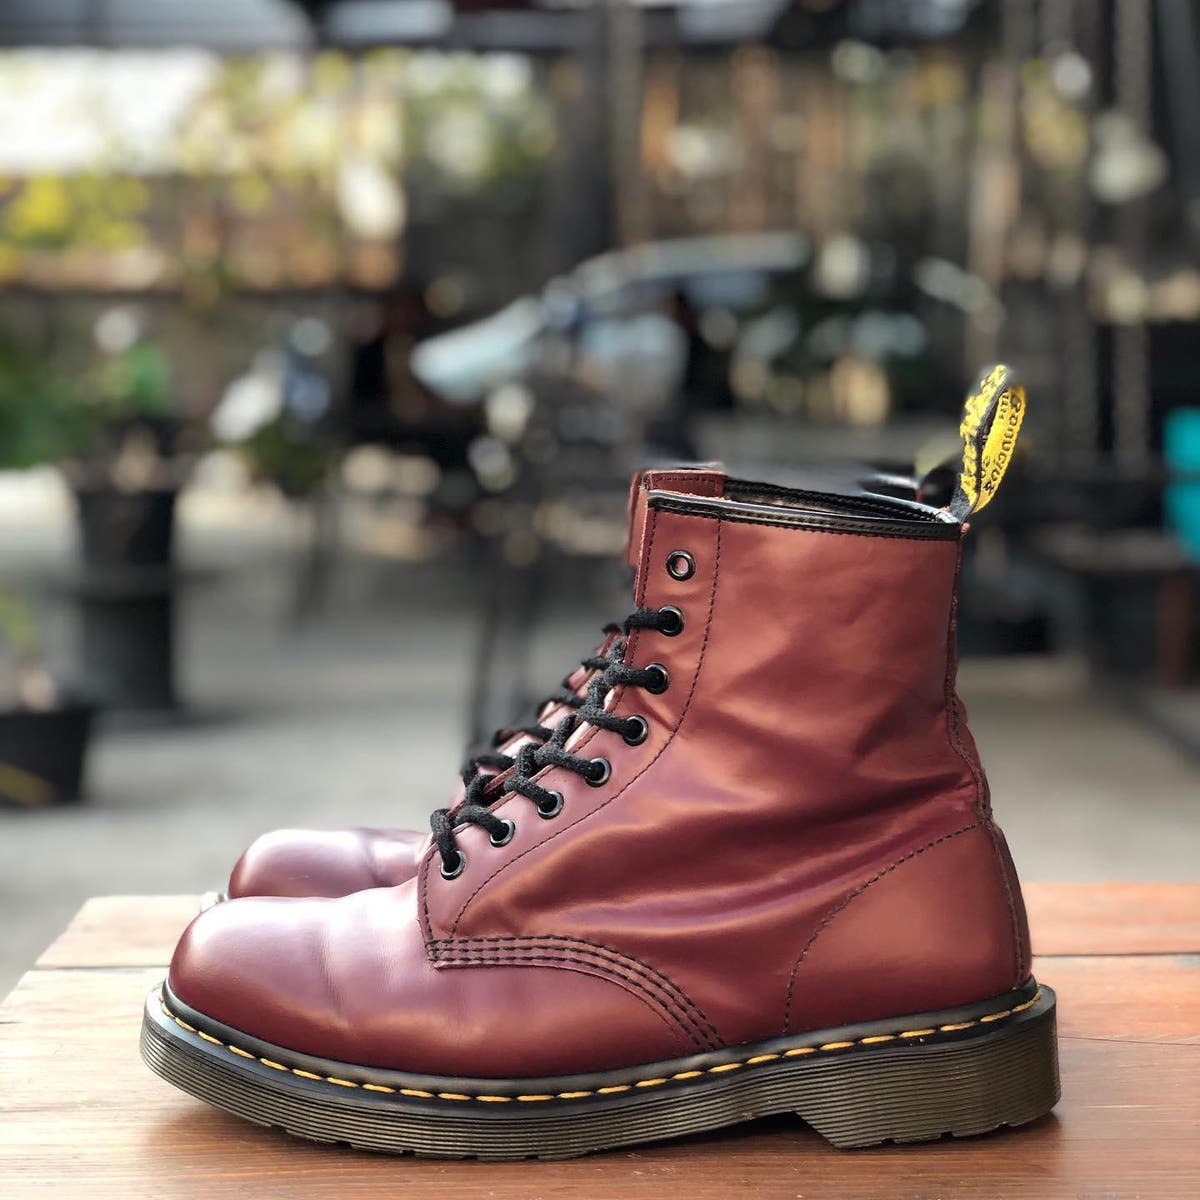 Dr Martens marches on with strong sales but listing dents profits | The ...